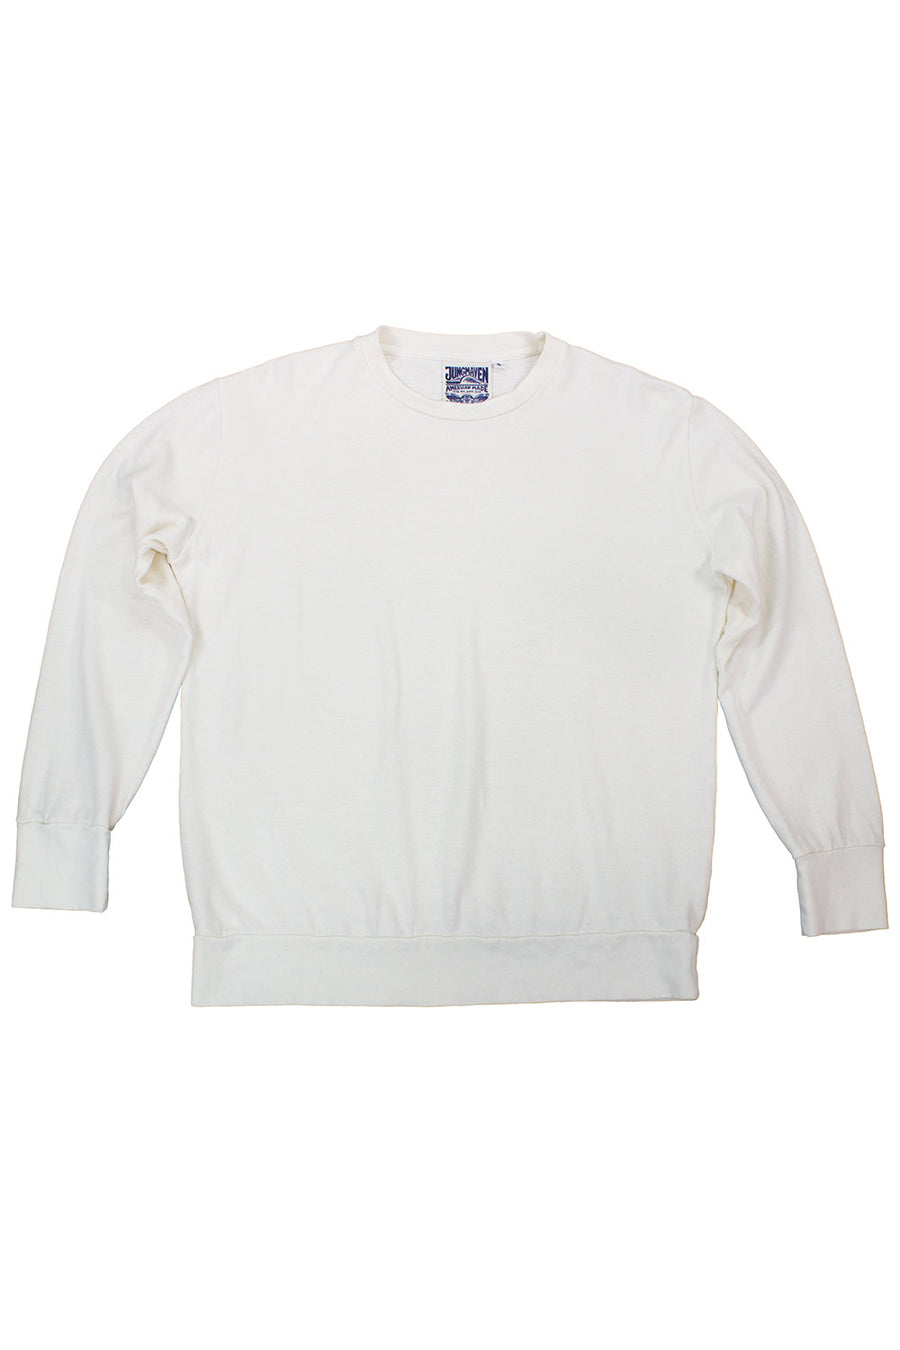 CALIFORNIA CREWNECK PULLOVER - WASHED WHITE